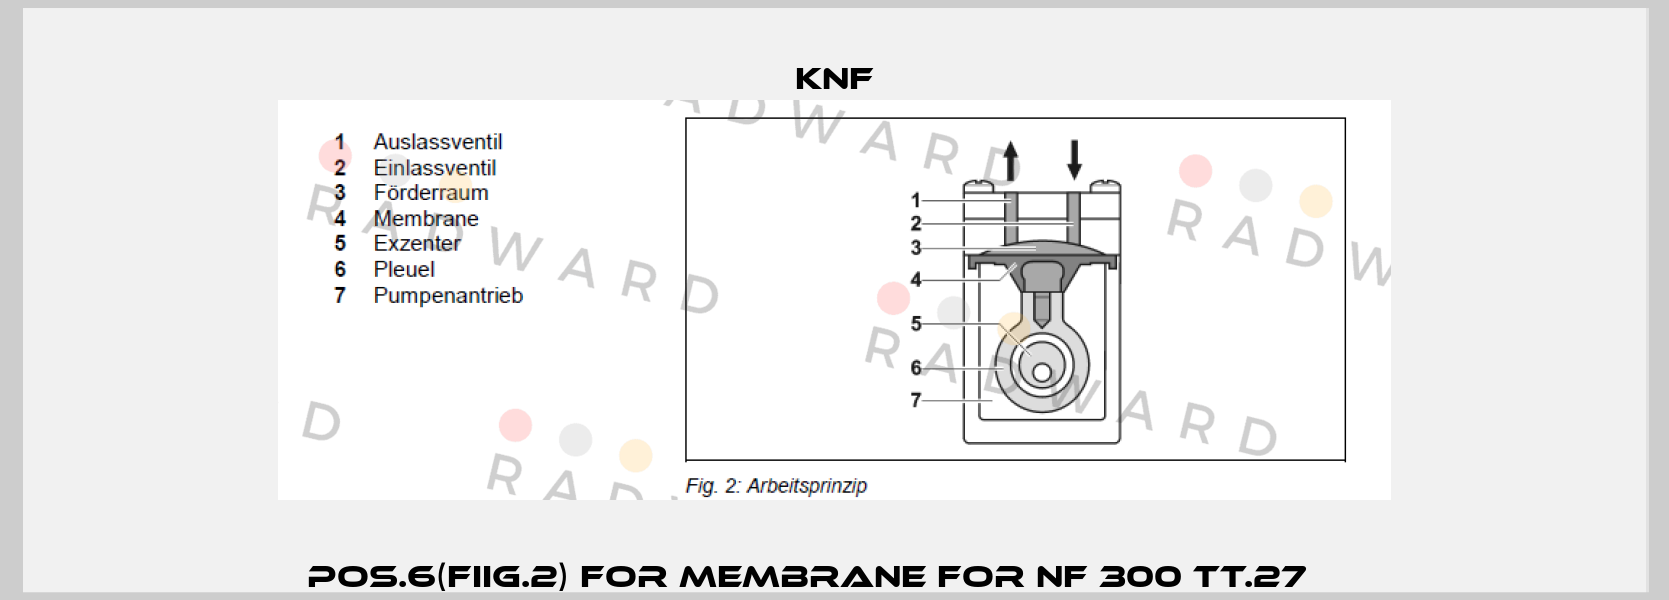 Pos.6(fiig.2) for membrane for NF 300 TT.27АА  KNF